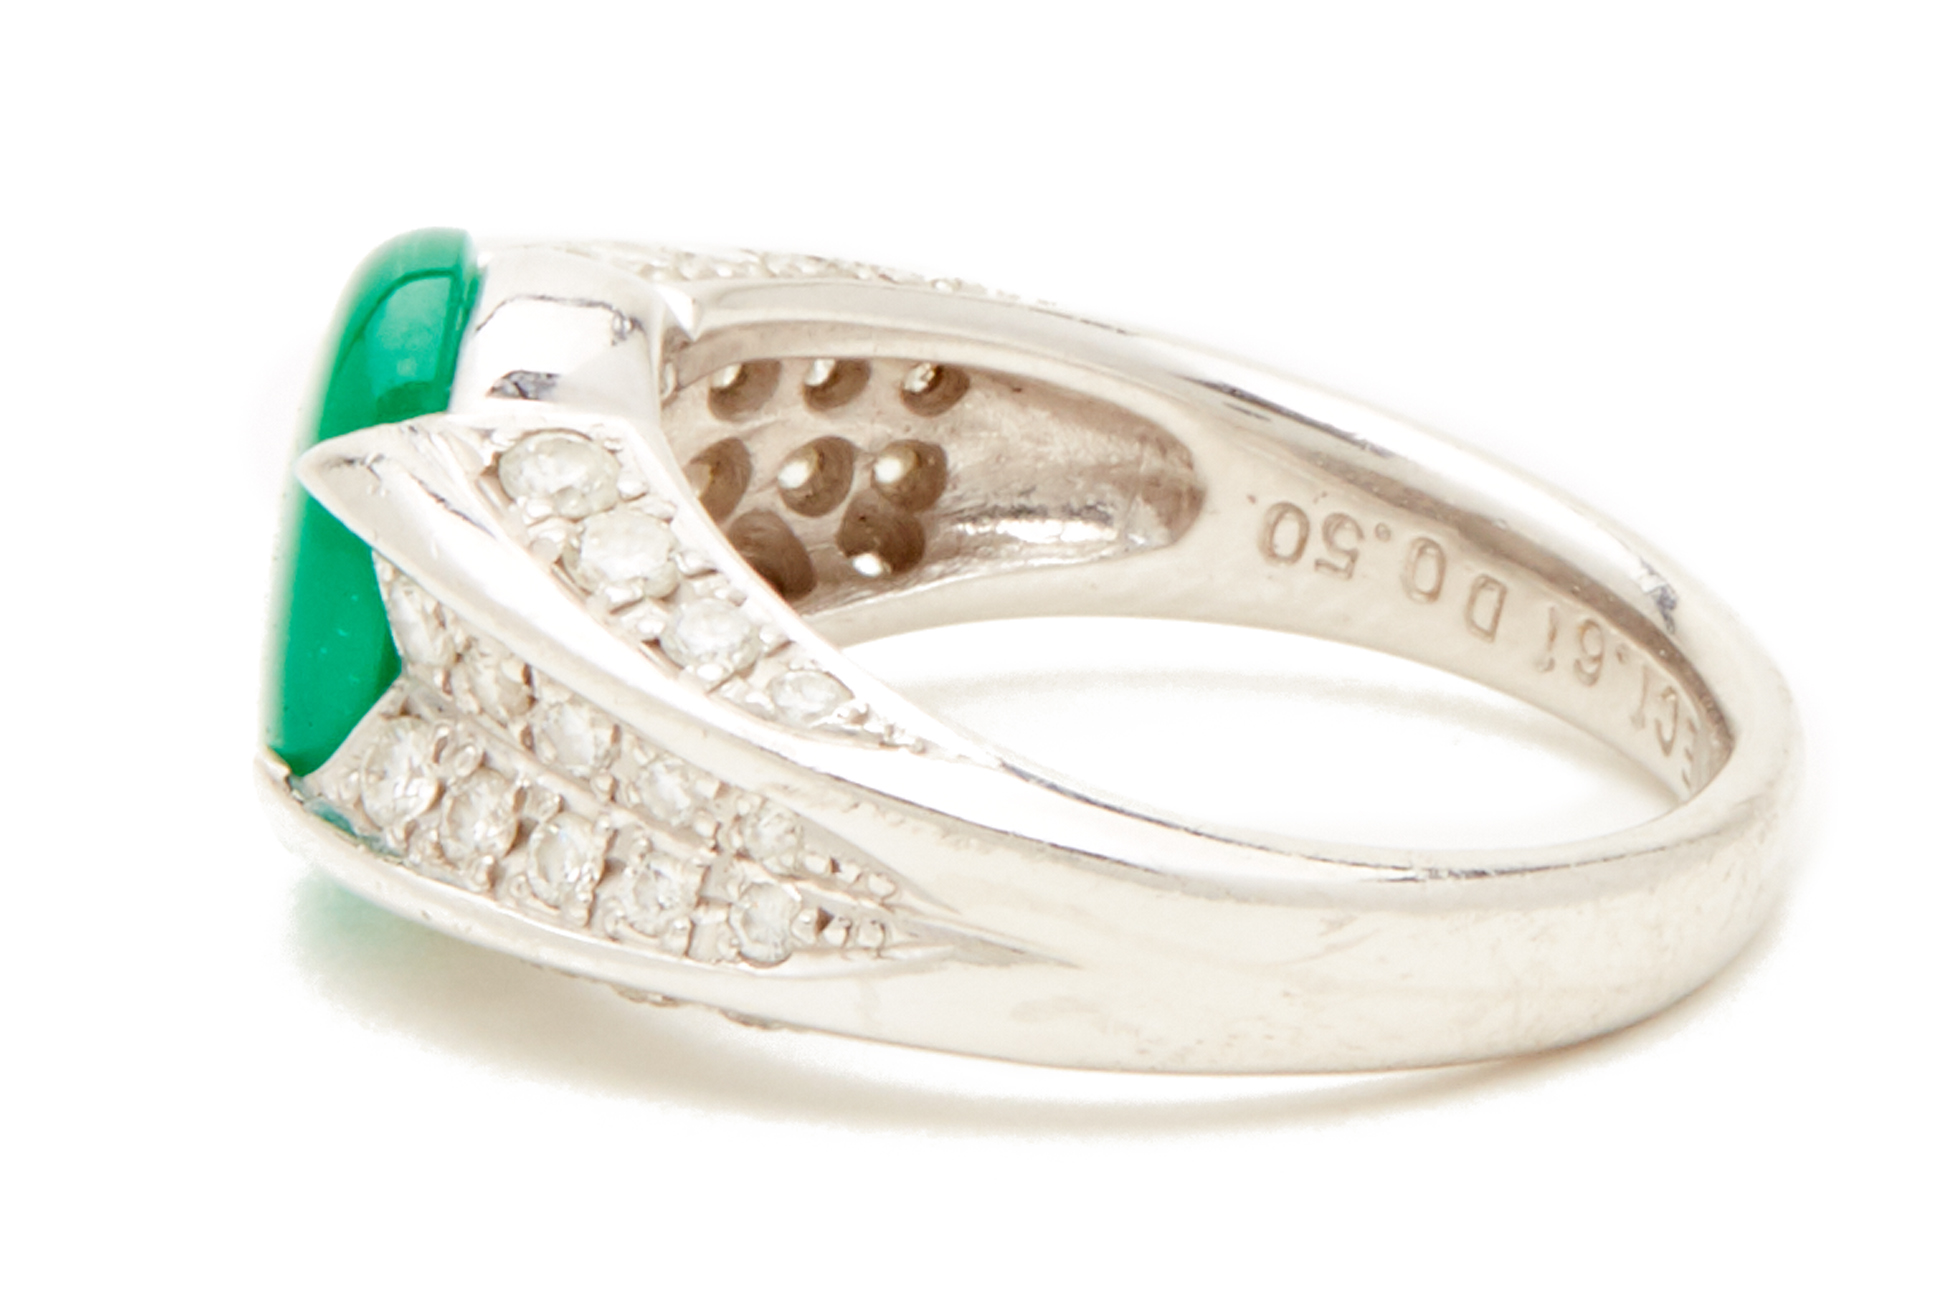 A PLATINUM, CABOCHON EMERALD AND DIAMOND RING - Image 3 of 5